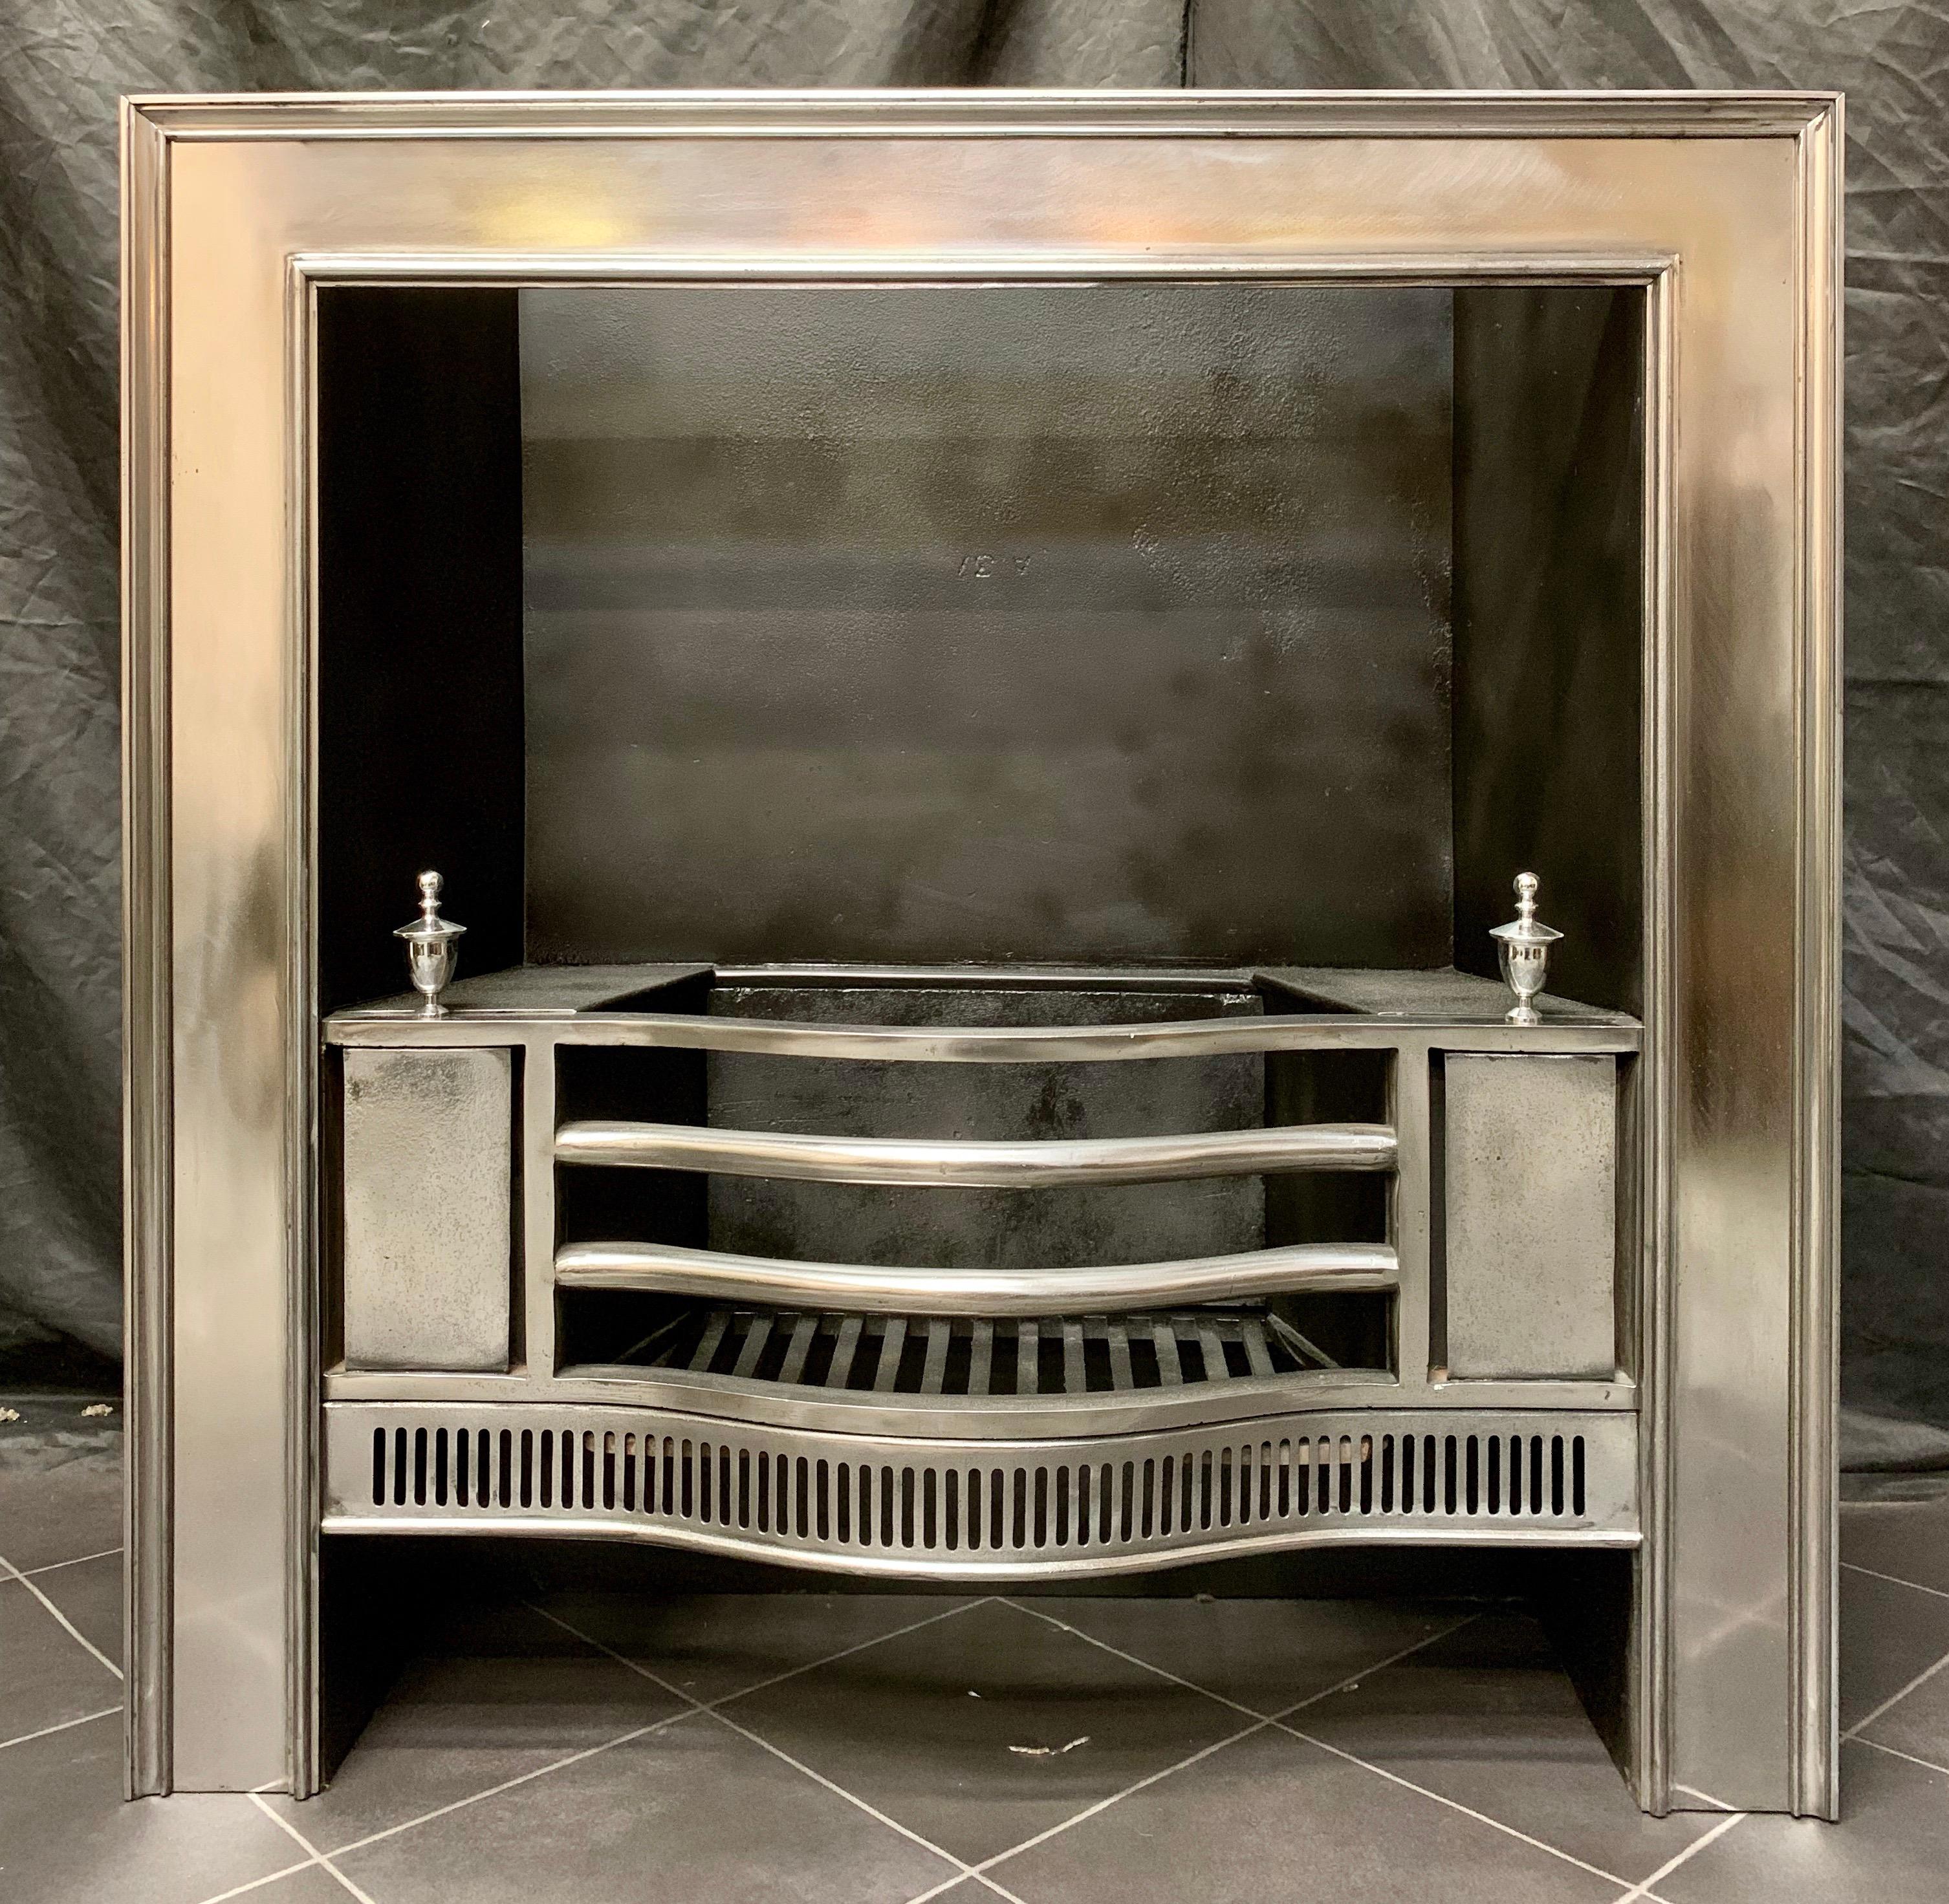 A fine antique Georgian polished steel fireplace register grate insert with a frame of moulding to the border, a three barred grate surmounted by a pair of polished finials above a cut and beaded apron.
The coloring on the polished steel photos is